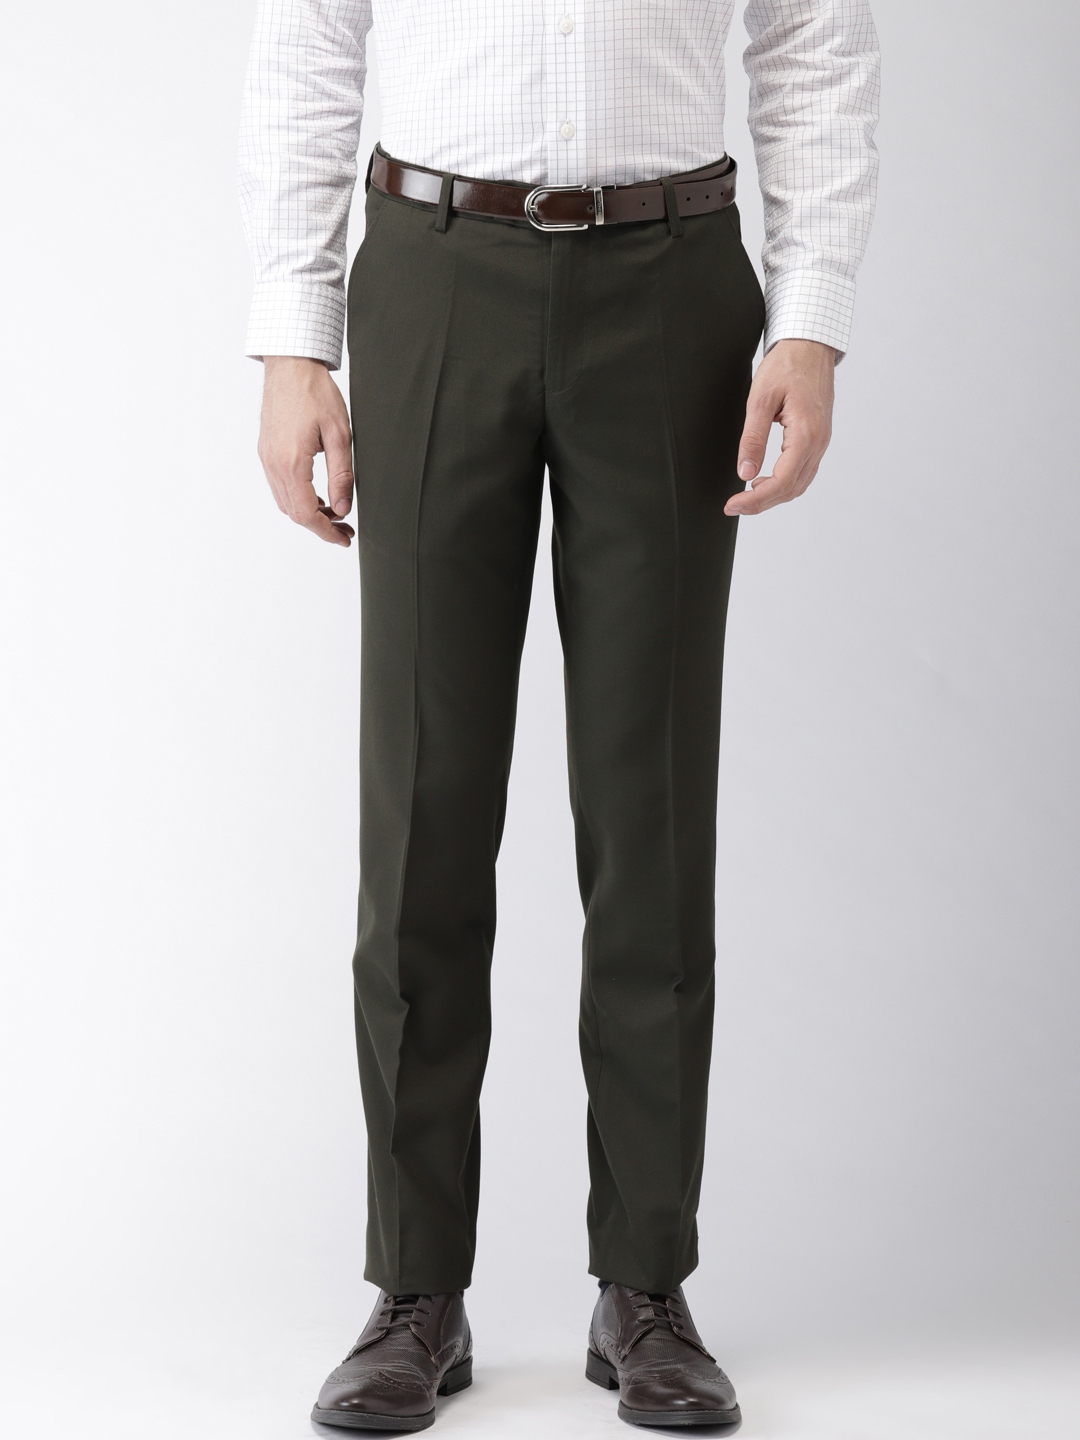 12 Best Formal Shirts and Pants Color Combination Ideas For Men